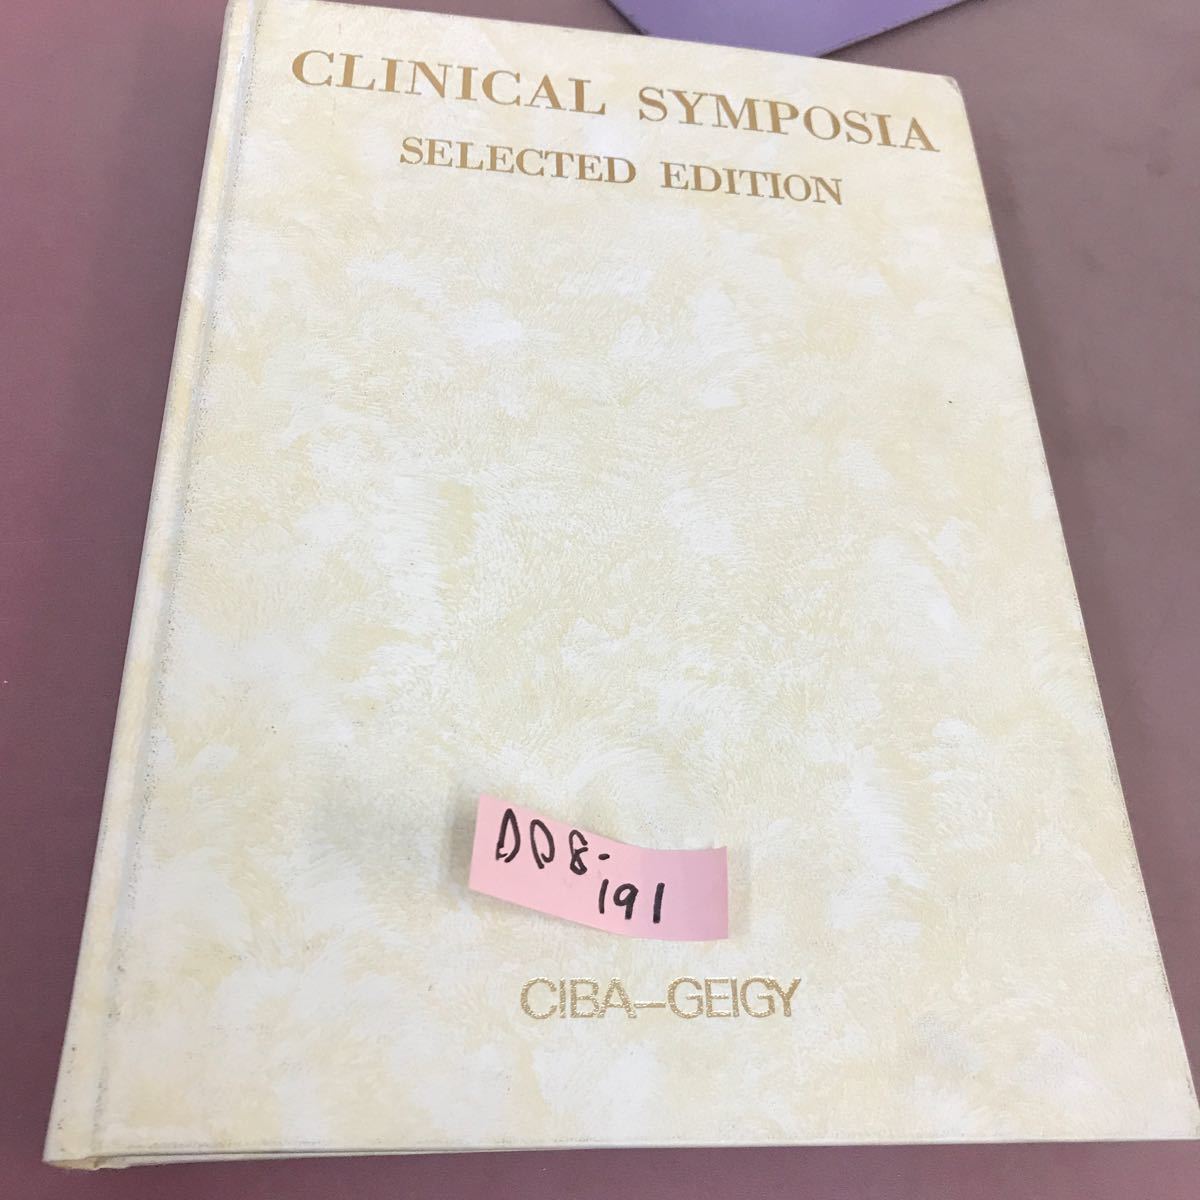 D08-191 CLINICAL SYMPOSIA SELECTED EDITION 折れあり